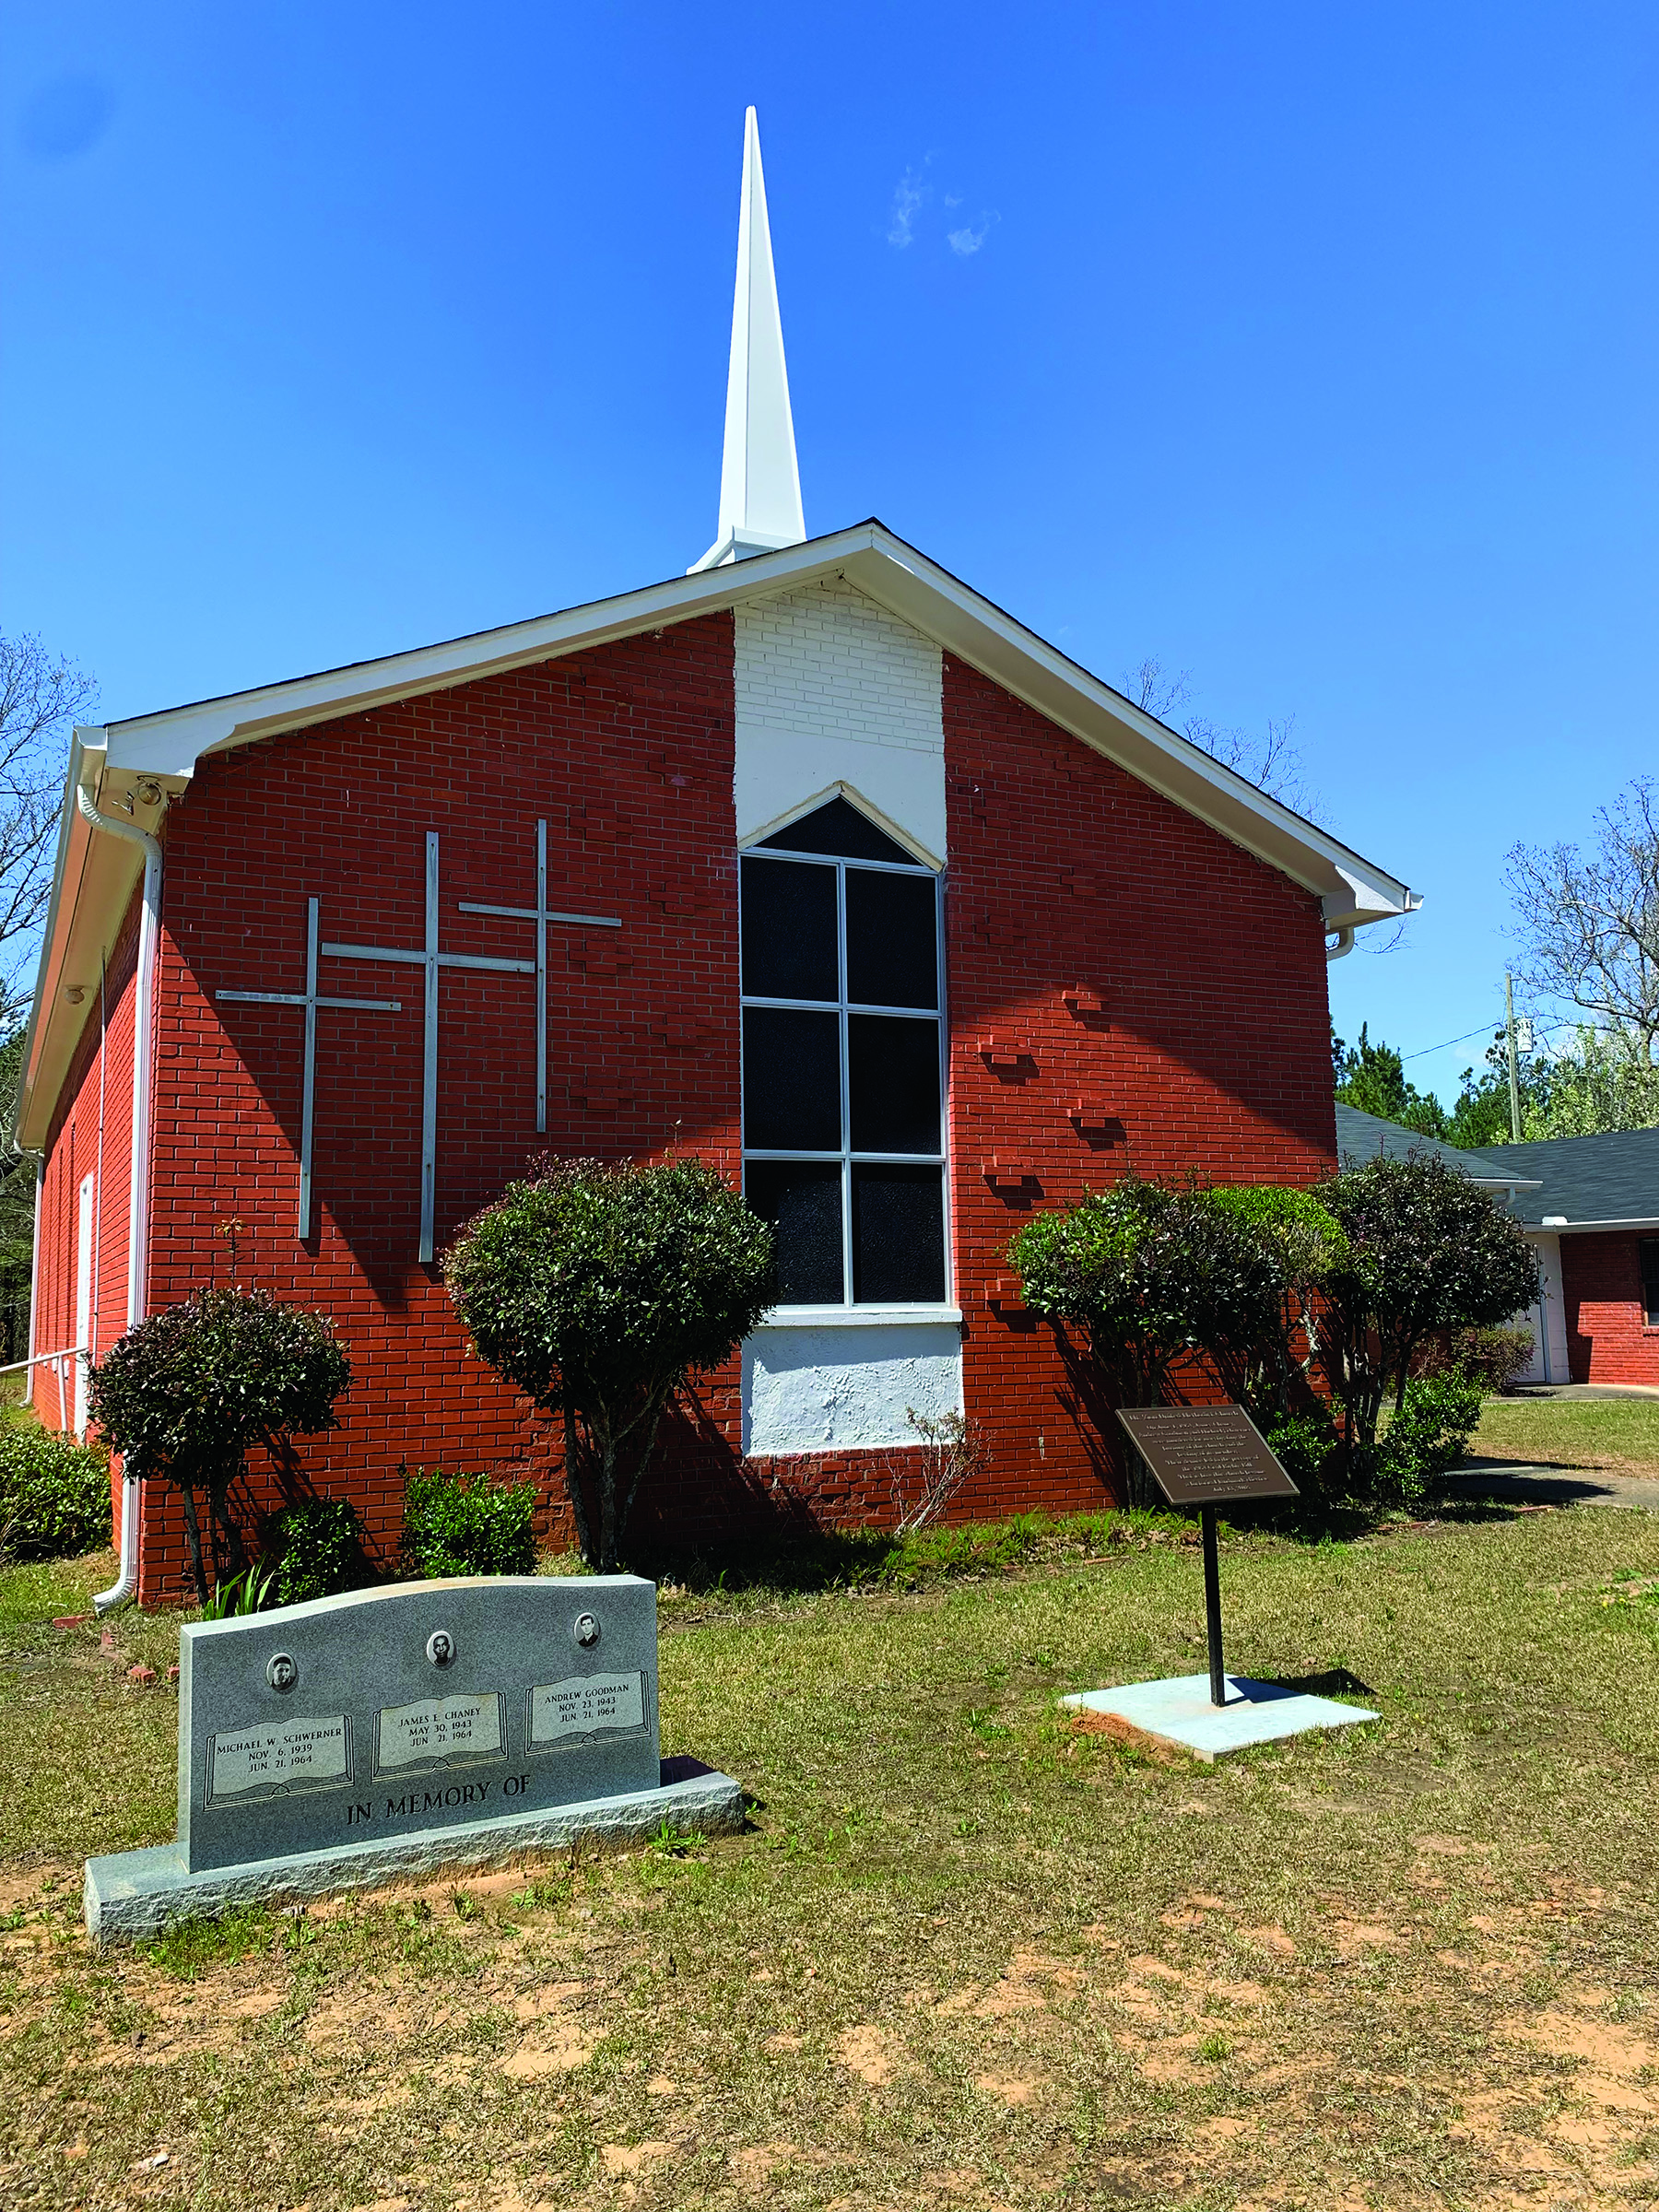 A Memorial at the Mt. Zion Historic United Methodist Church in Philadelphia, Mississippi, March 2022. Photograph by Zack Tucker. The Mt. Zion Historic United Methodist Church in Philadelphia, Mississippi has many memorials on their grounds commemorating the slain Freedom Summer volunteers, Chaney, Goodman, and Schwerner and those who dedicate their lives fighting for human rights. These memorials serve as reminder of injustices of the past and inspire current and future generations to strive for more equitable democracies, connecting it with the intention of the memorial in Oxford, Ohio. Photo Courtesy of Zack Tucker.